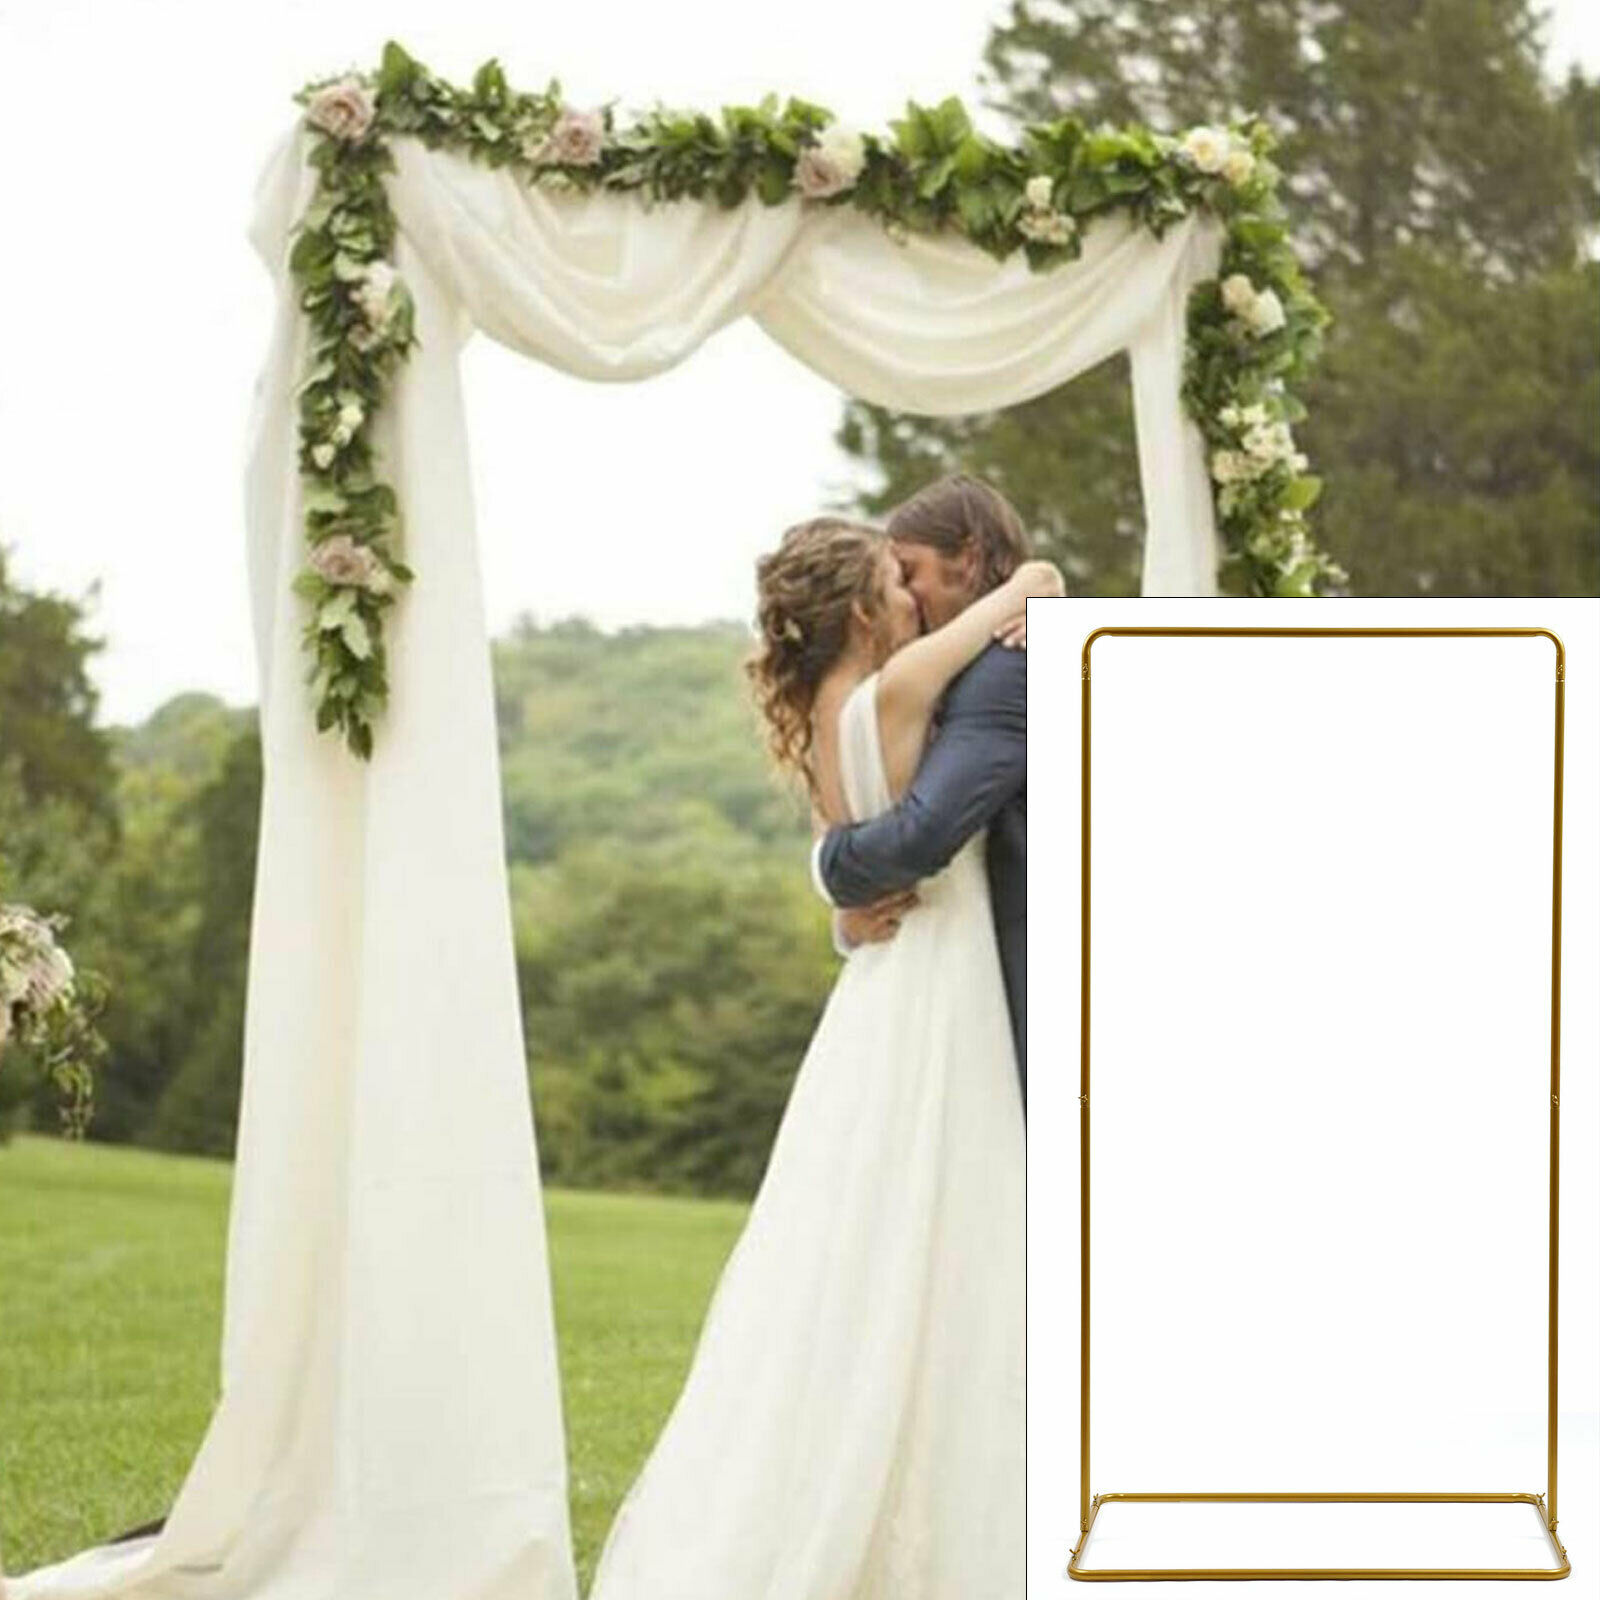 Wedding Arch Iron Flower Square Frame Garden Wedding Arch Door Background Gold Backdrop Stand Gold Wedding Arch Flower Metal Rack Wedding Archway Party Decor Wedding Arch Gold Metal Decorate Garden - image 1 of 3